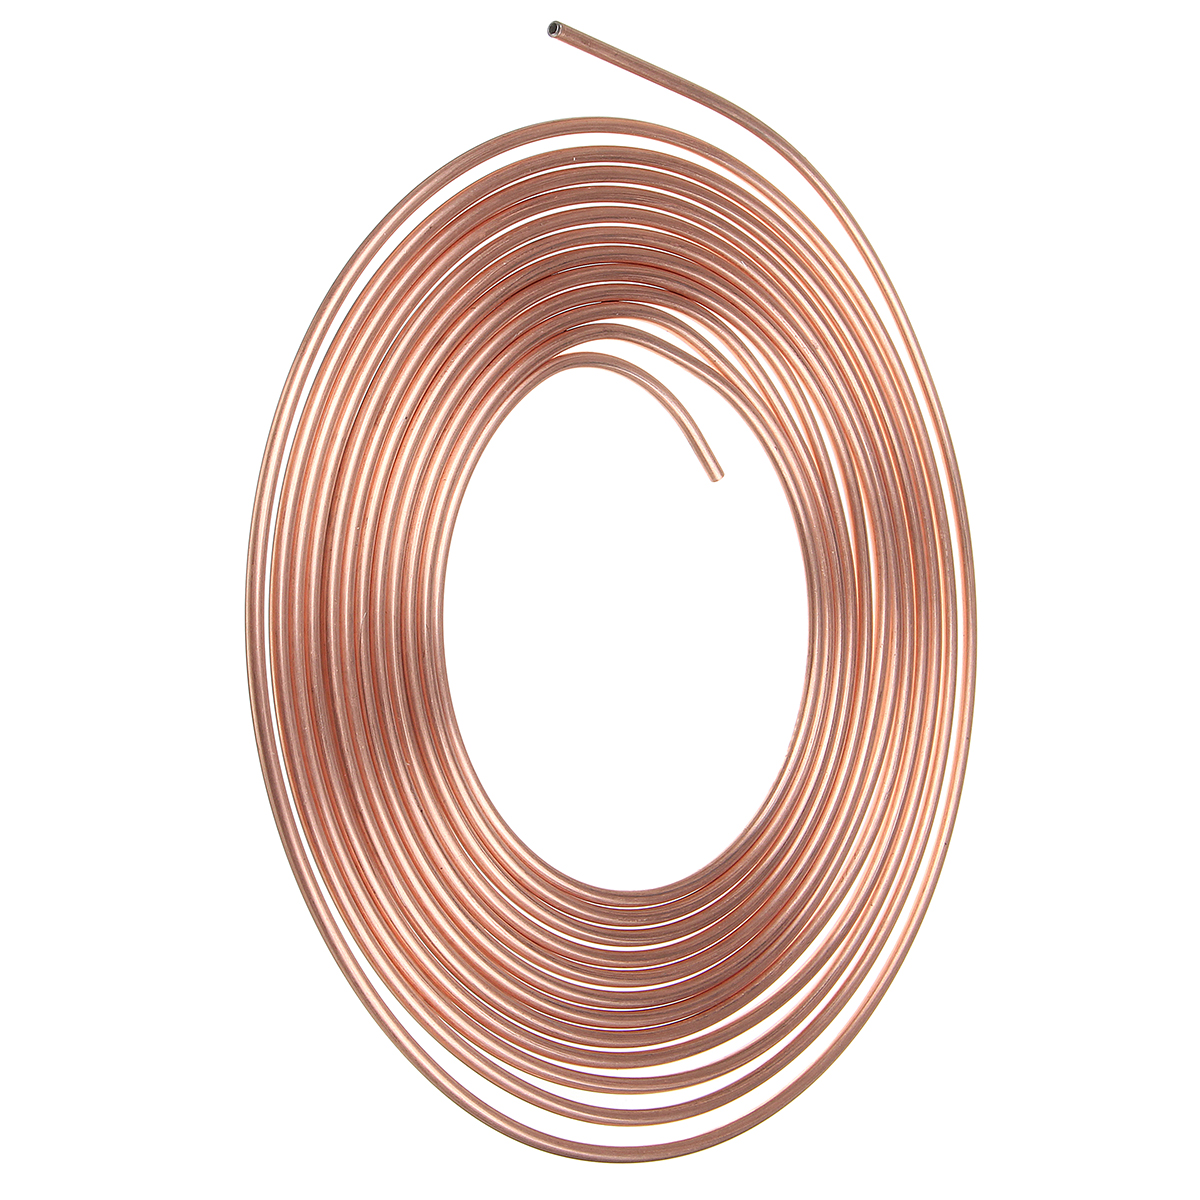 Roll-Copper-Steel-25-ft-316quot-Brake-Line-Pipe-Tubing-with-20-Pcs-Kit-Fittings-Brake-Female-Male-Nu-1543212